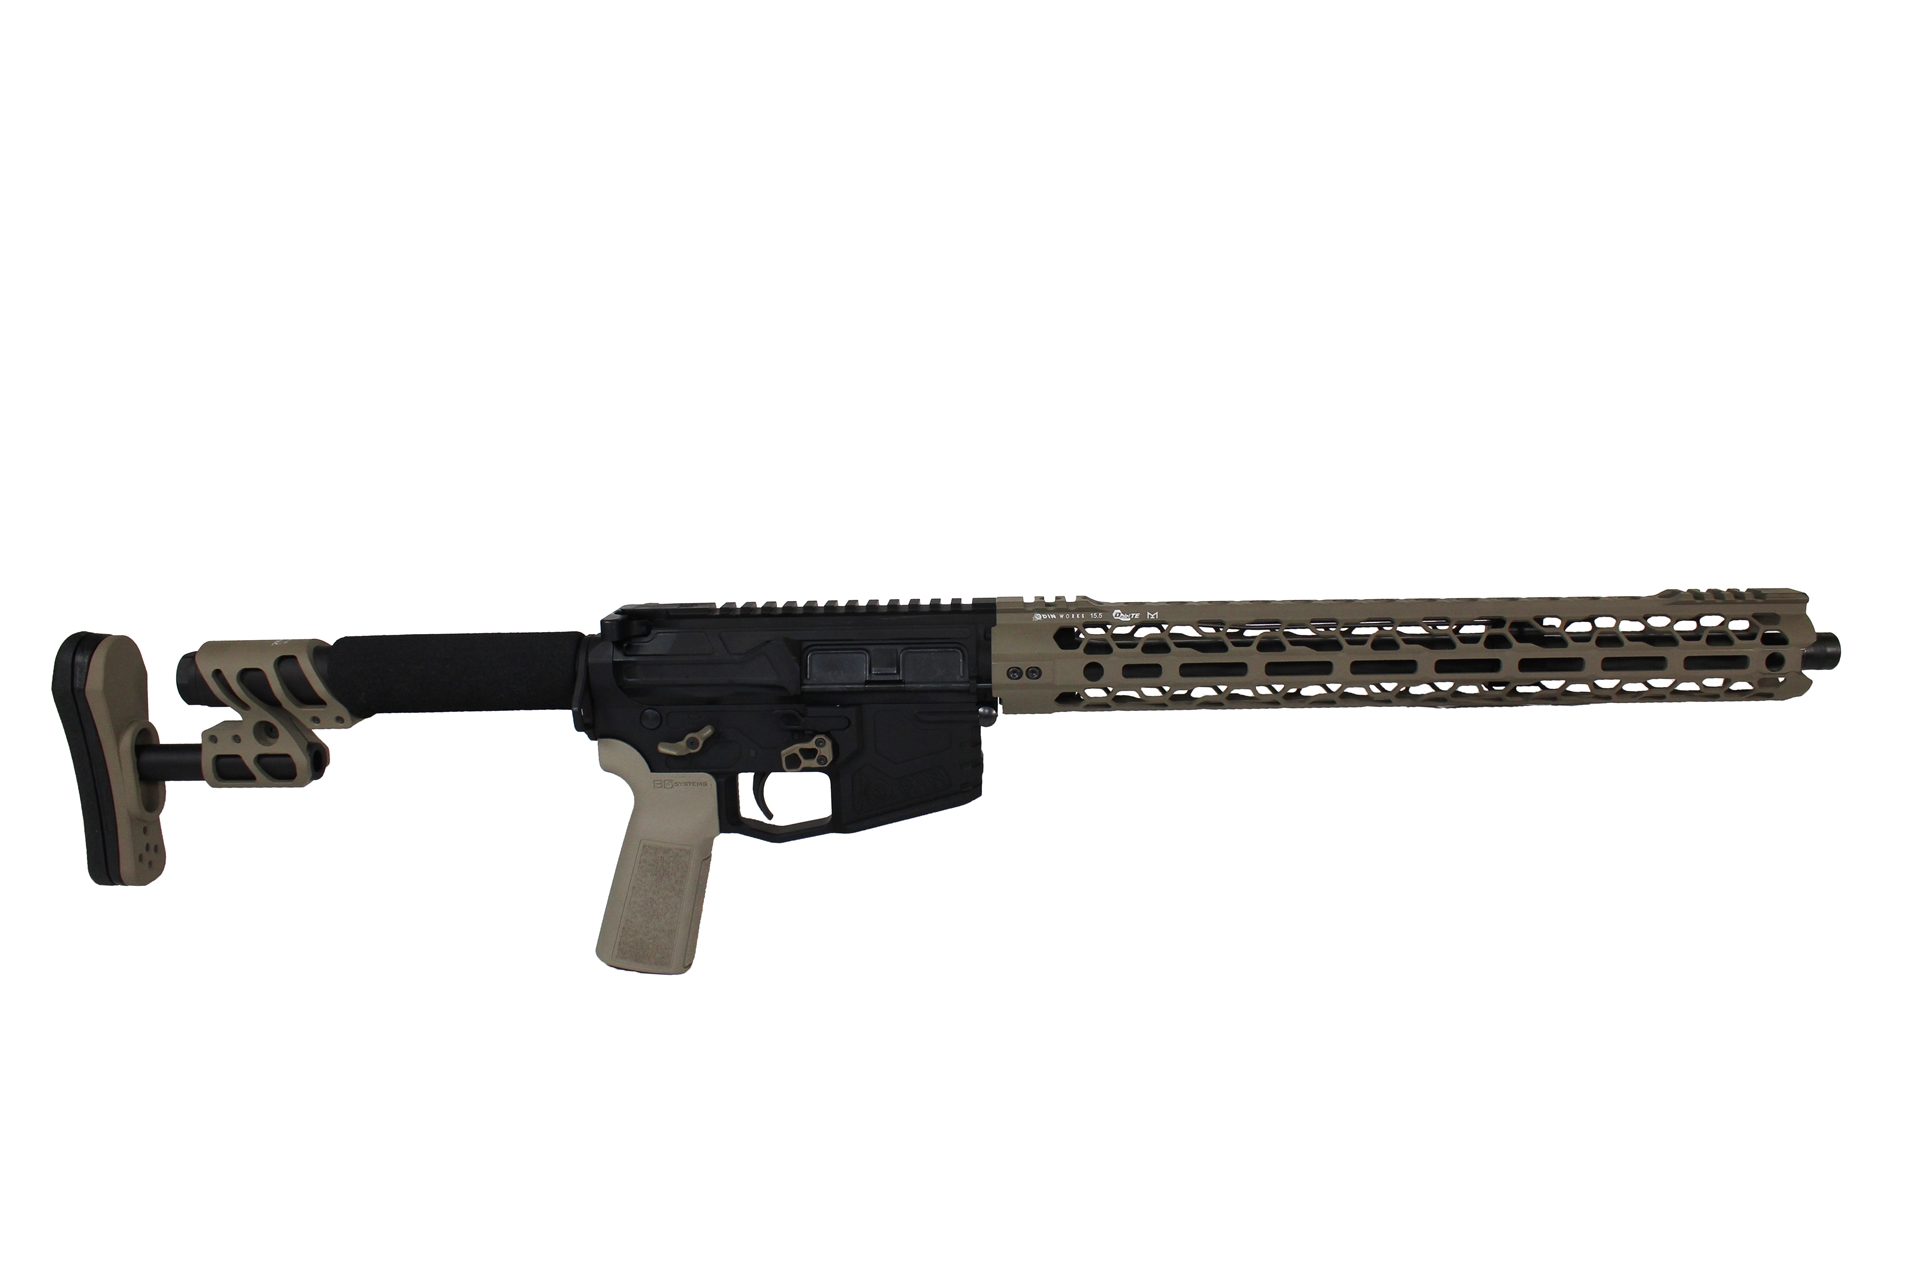 AR-15 rifle machined from billet 7075 aluminum by ODIN Works, complete with a Zulu Stock and Adjustable Gas Block